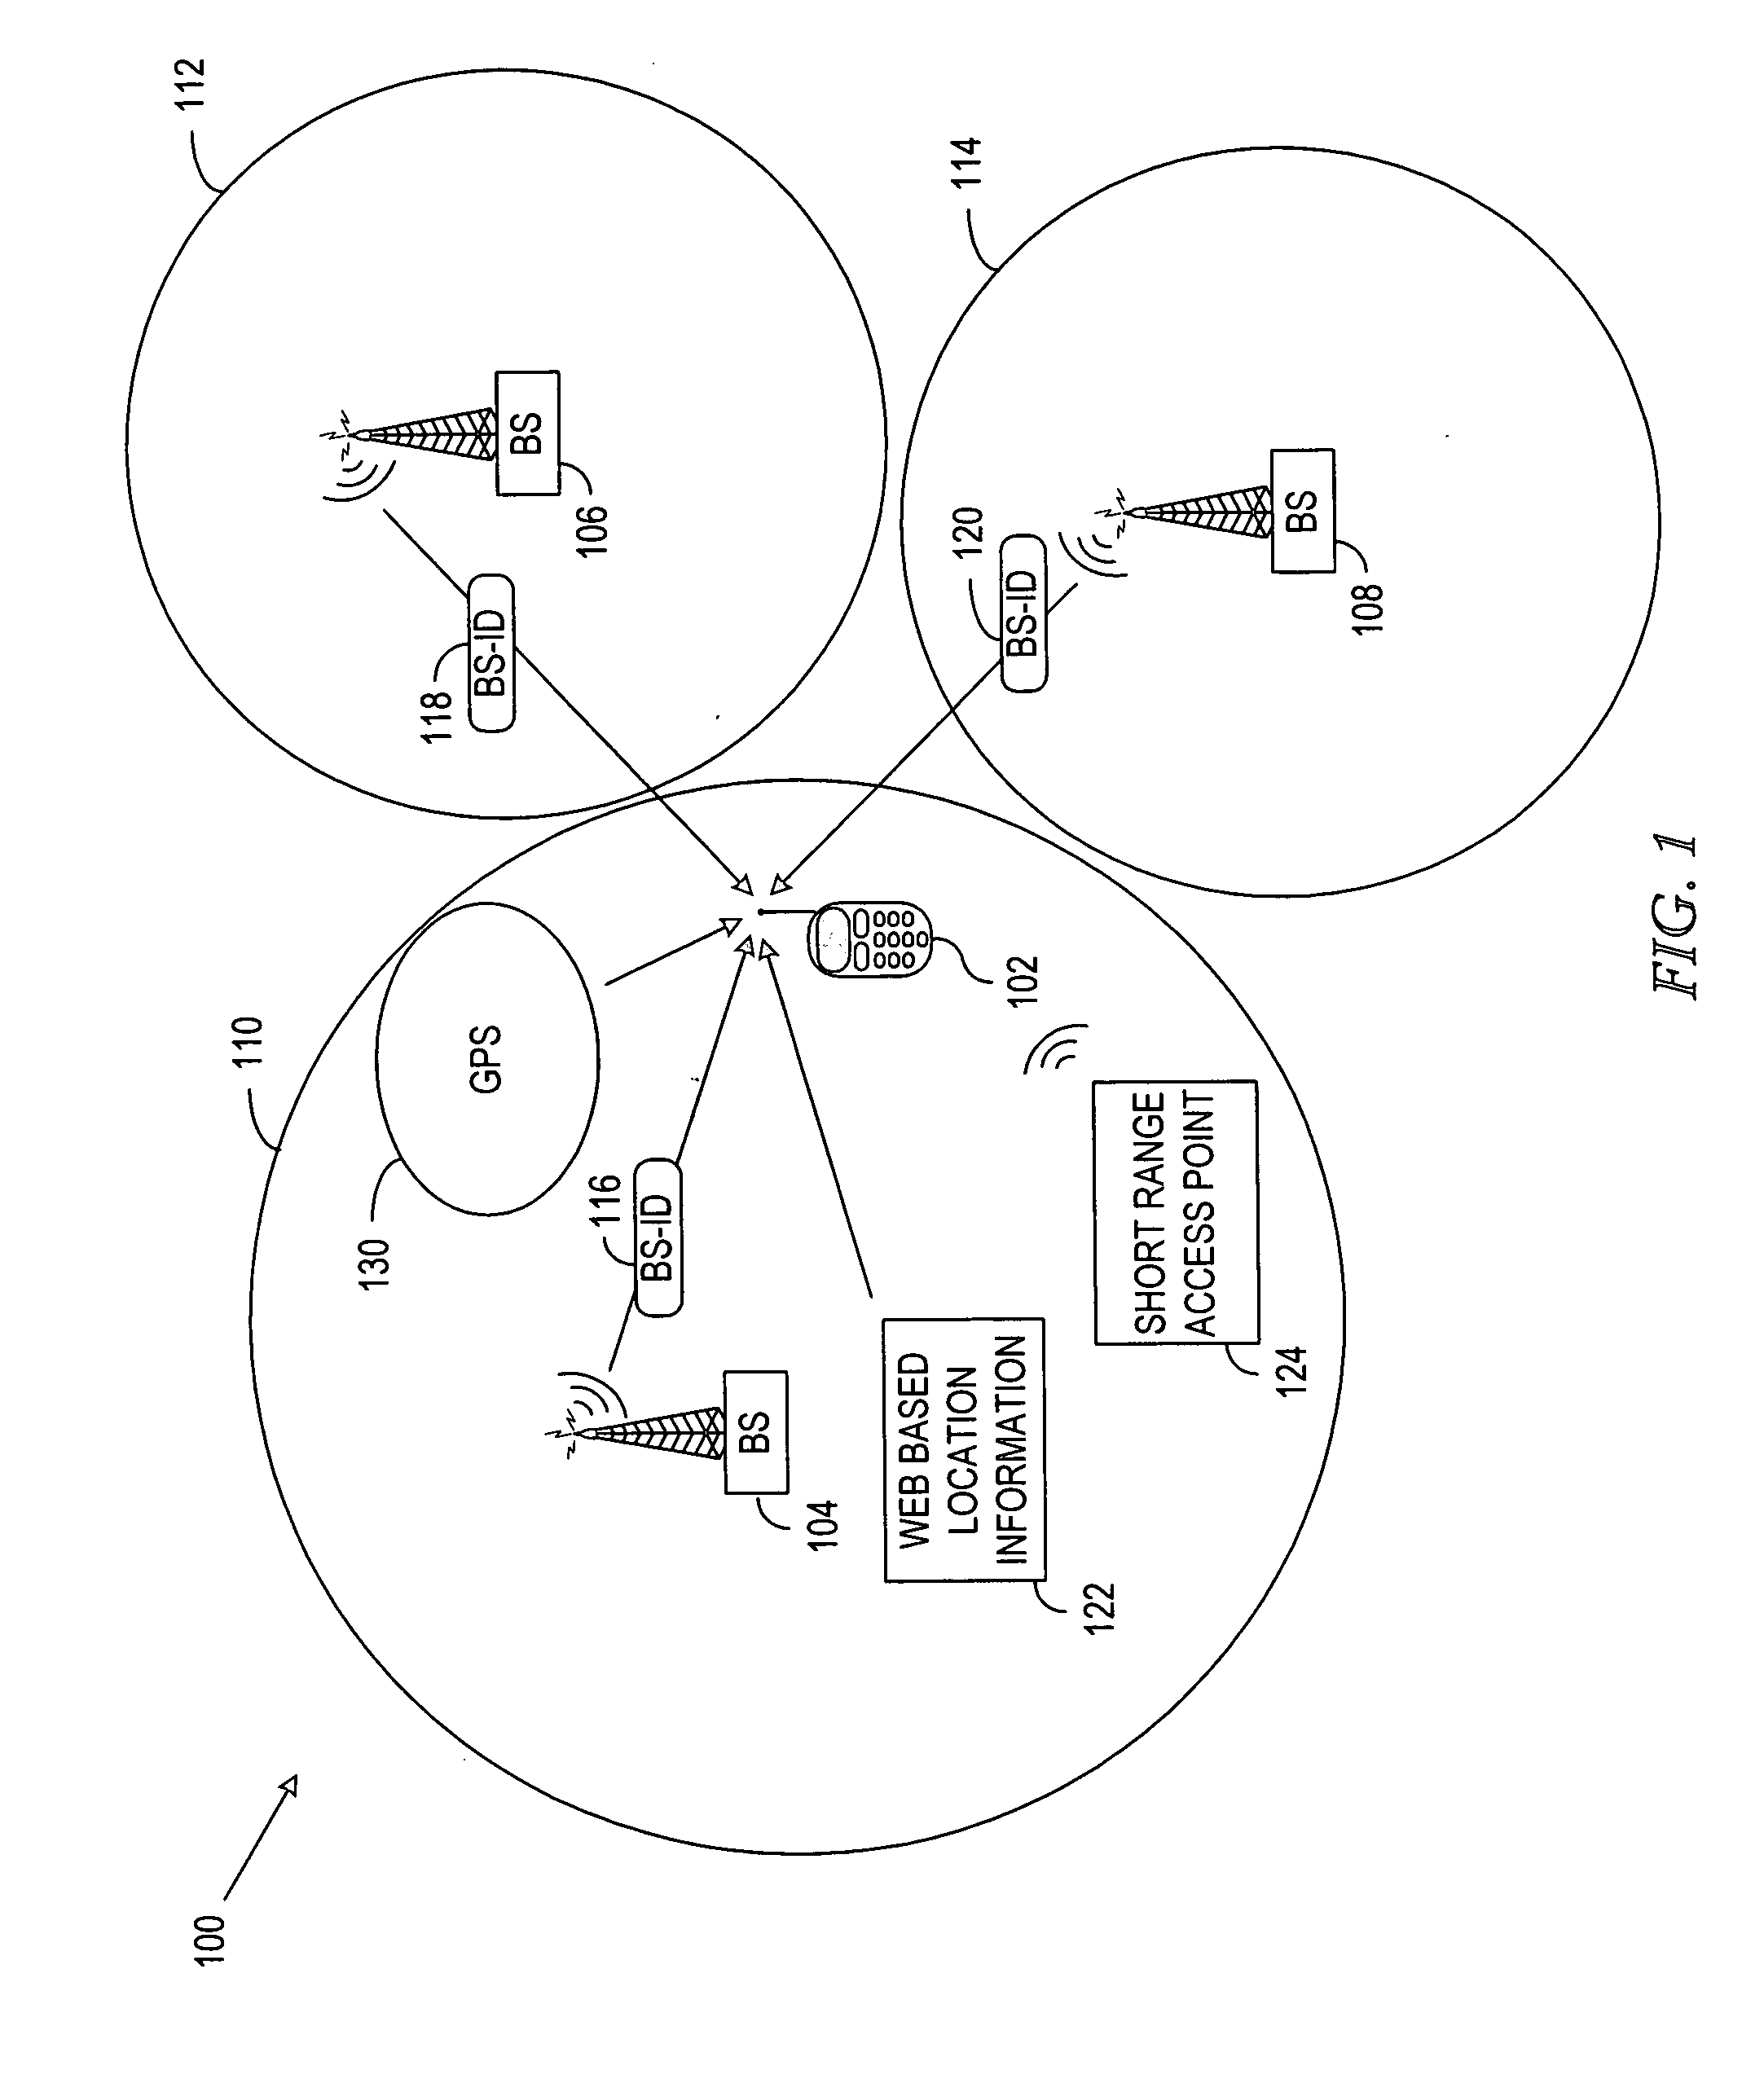 Methods and apparatus for geographically based Web services